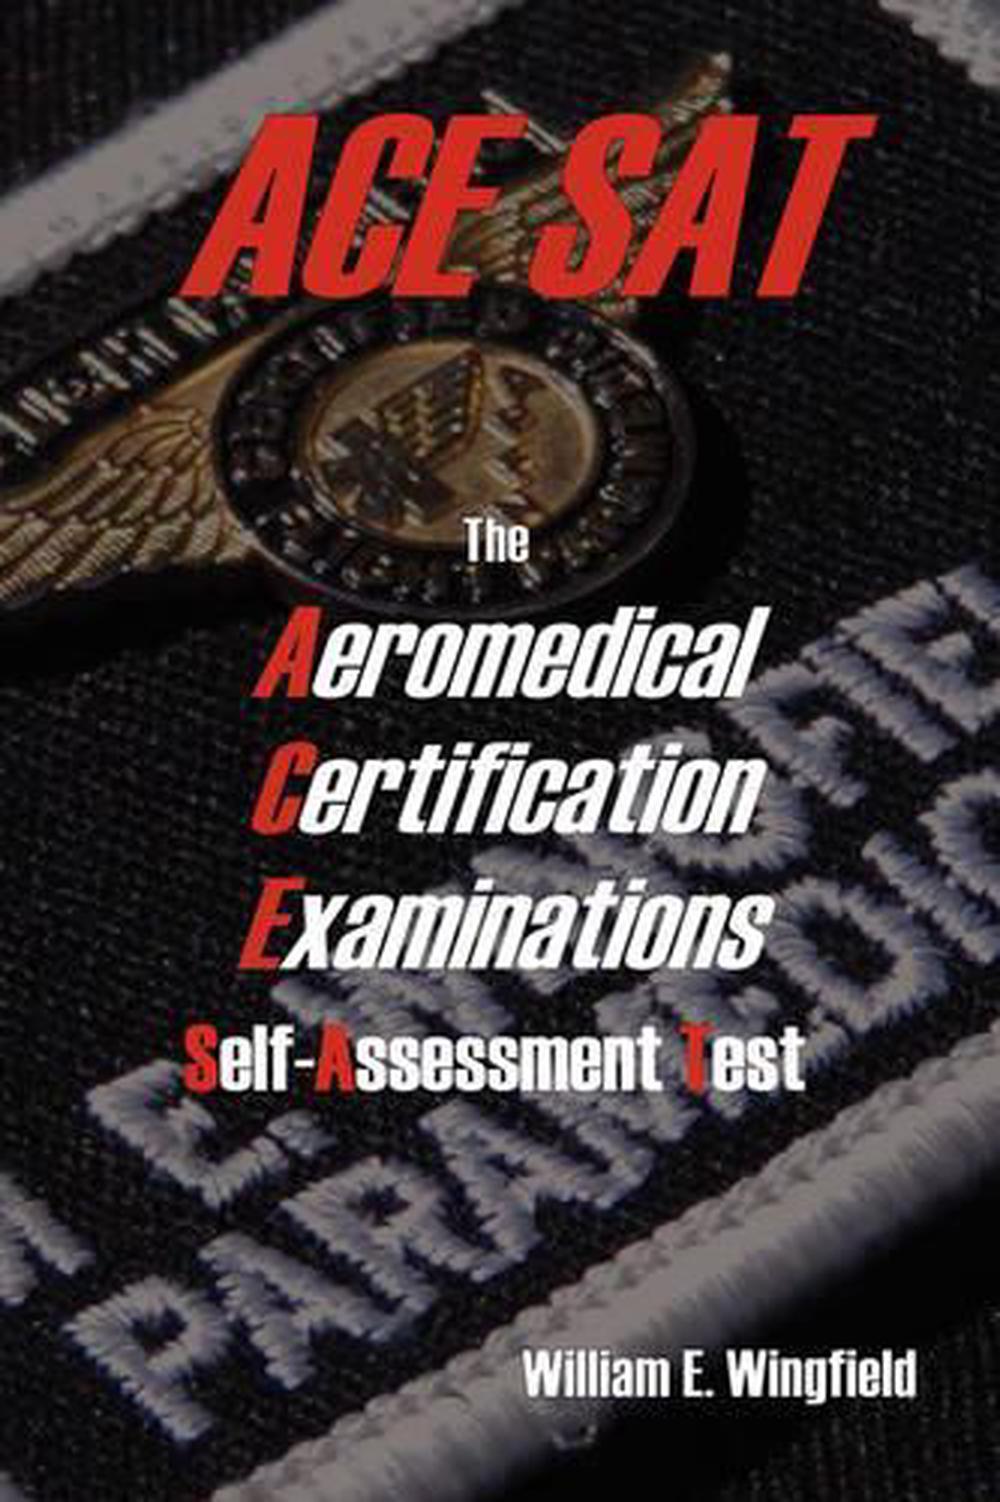 Aeromedical Certification Examinations Self Assessment Test ( Ace SAT